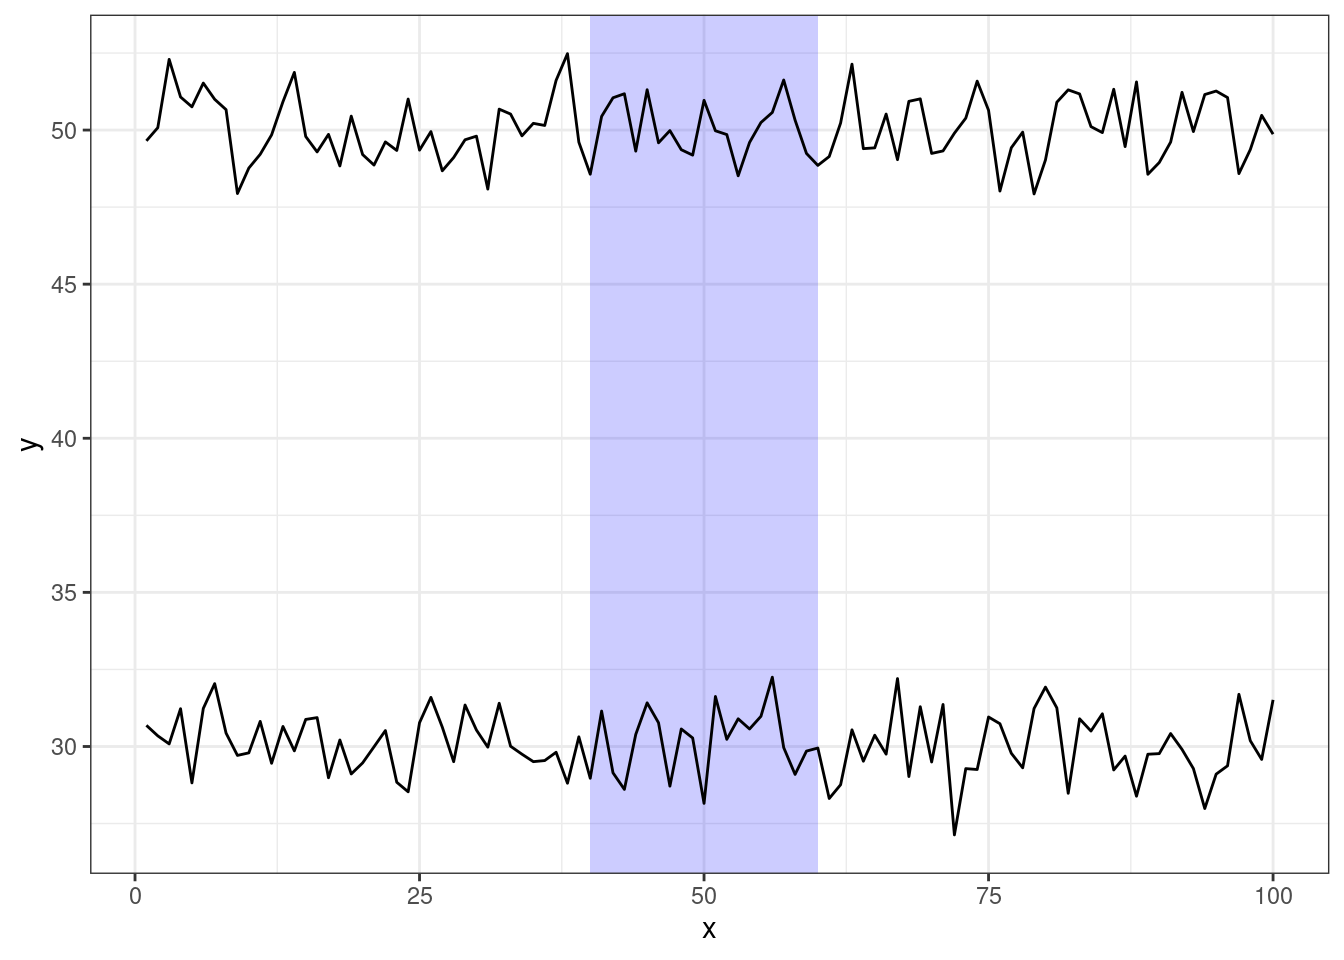 A time series with x = 40-60 highlighted